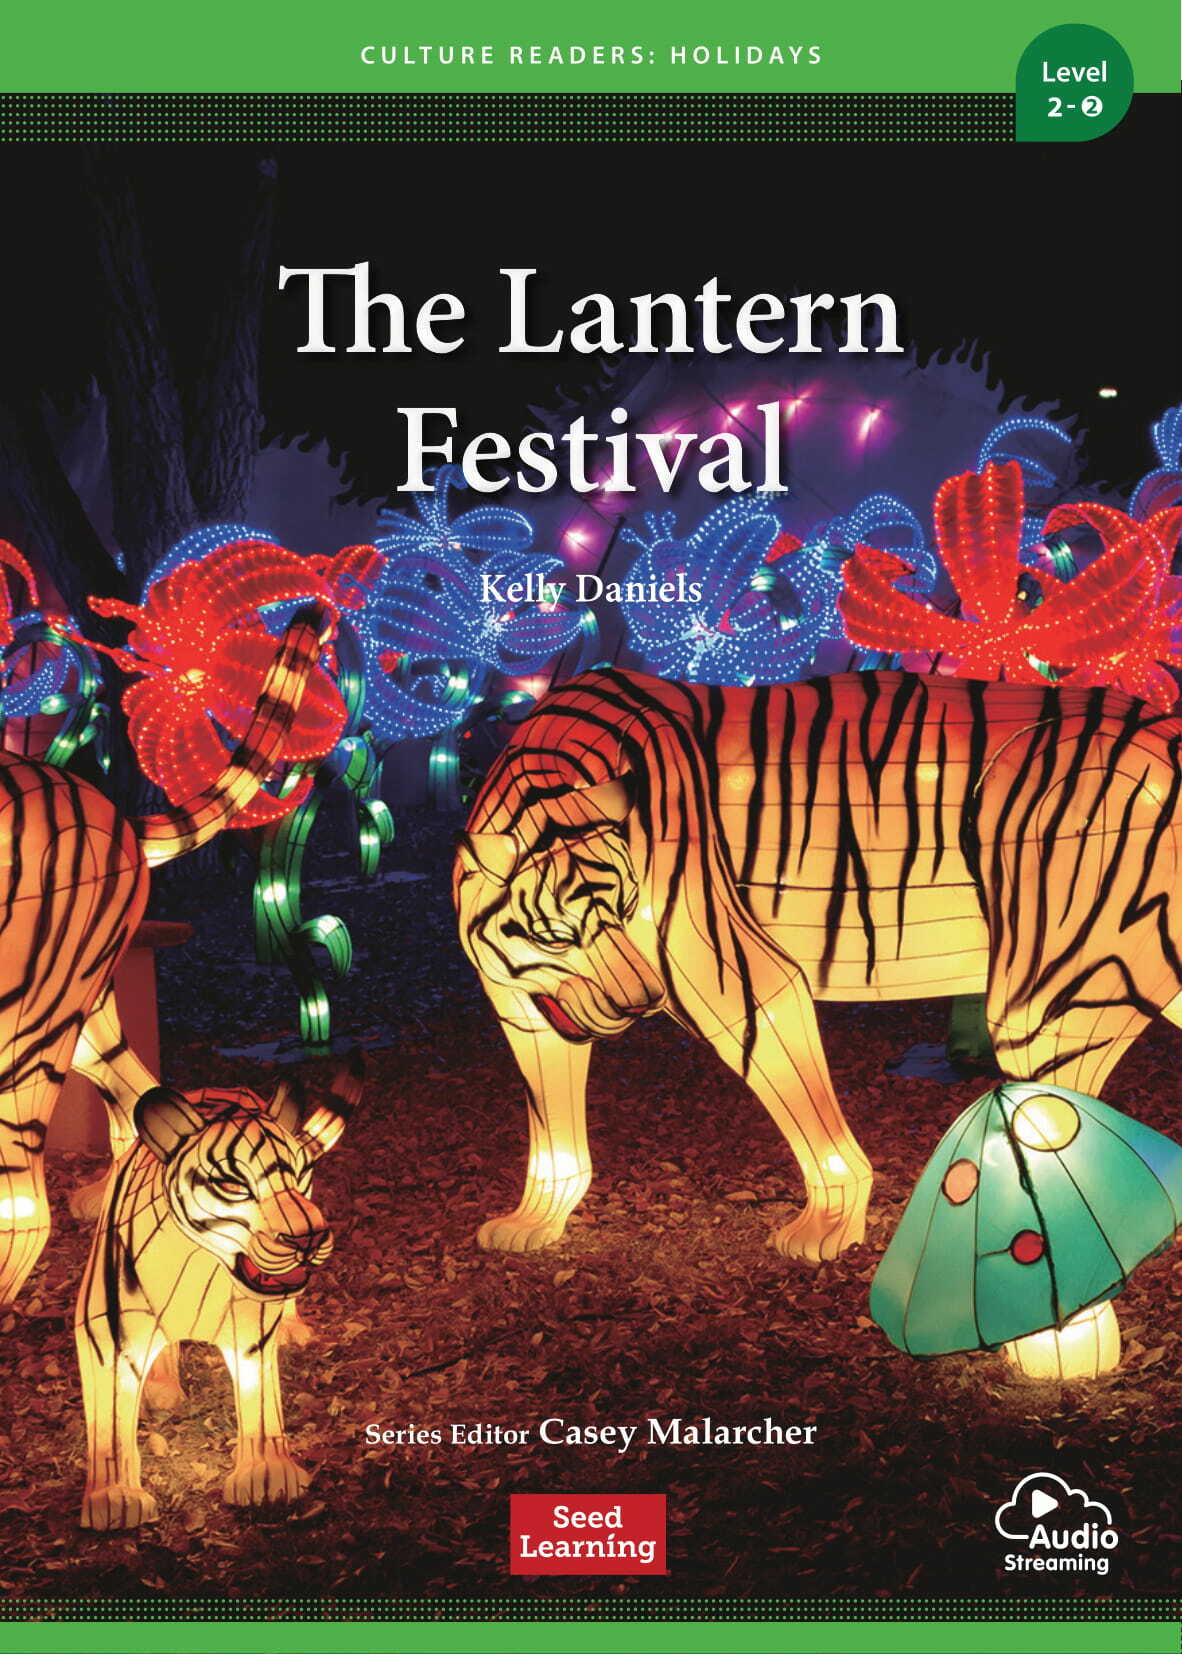 Culture Readers Holidays Level 2 : The Lantern Festival (Story Book + Audio APP)